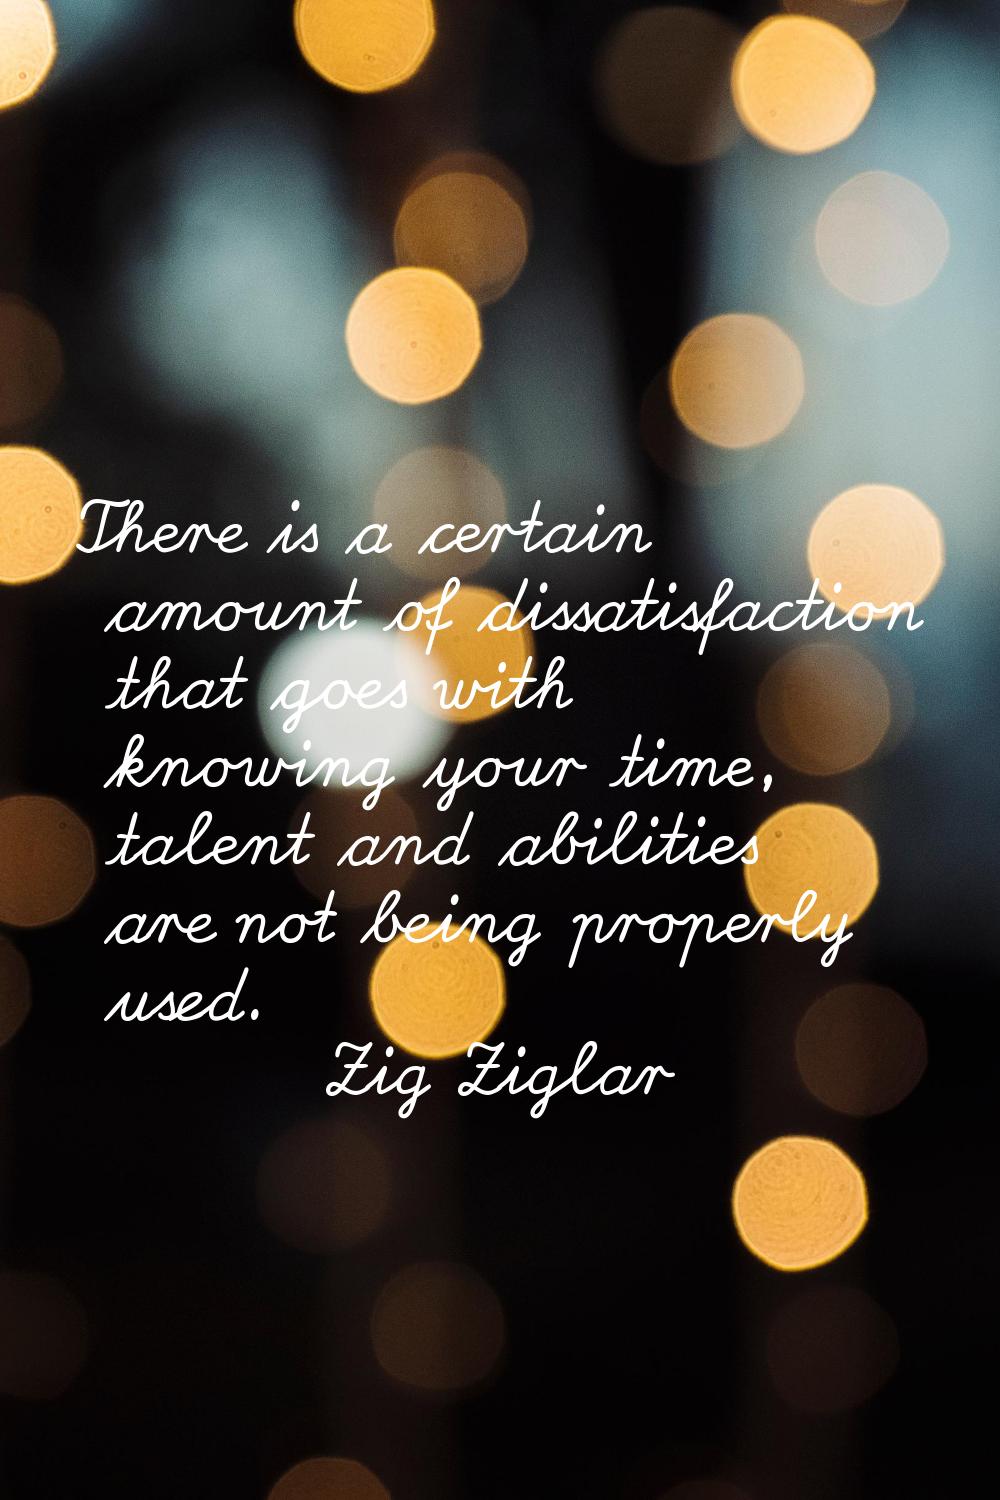 There is a certain amount of dissatisfaction that goes with knowing your time, talent and abilities